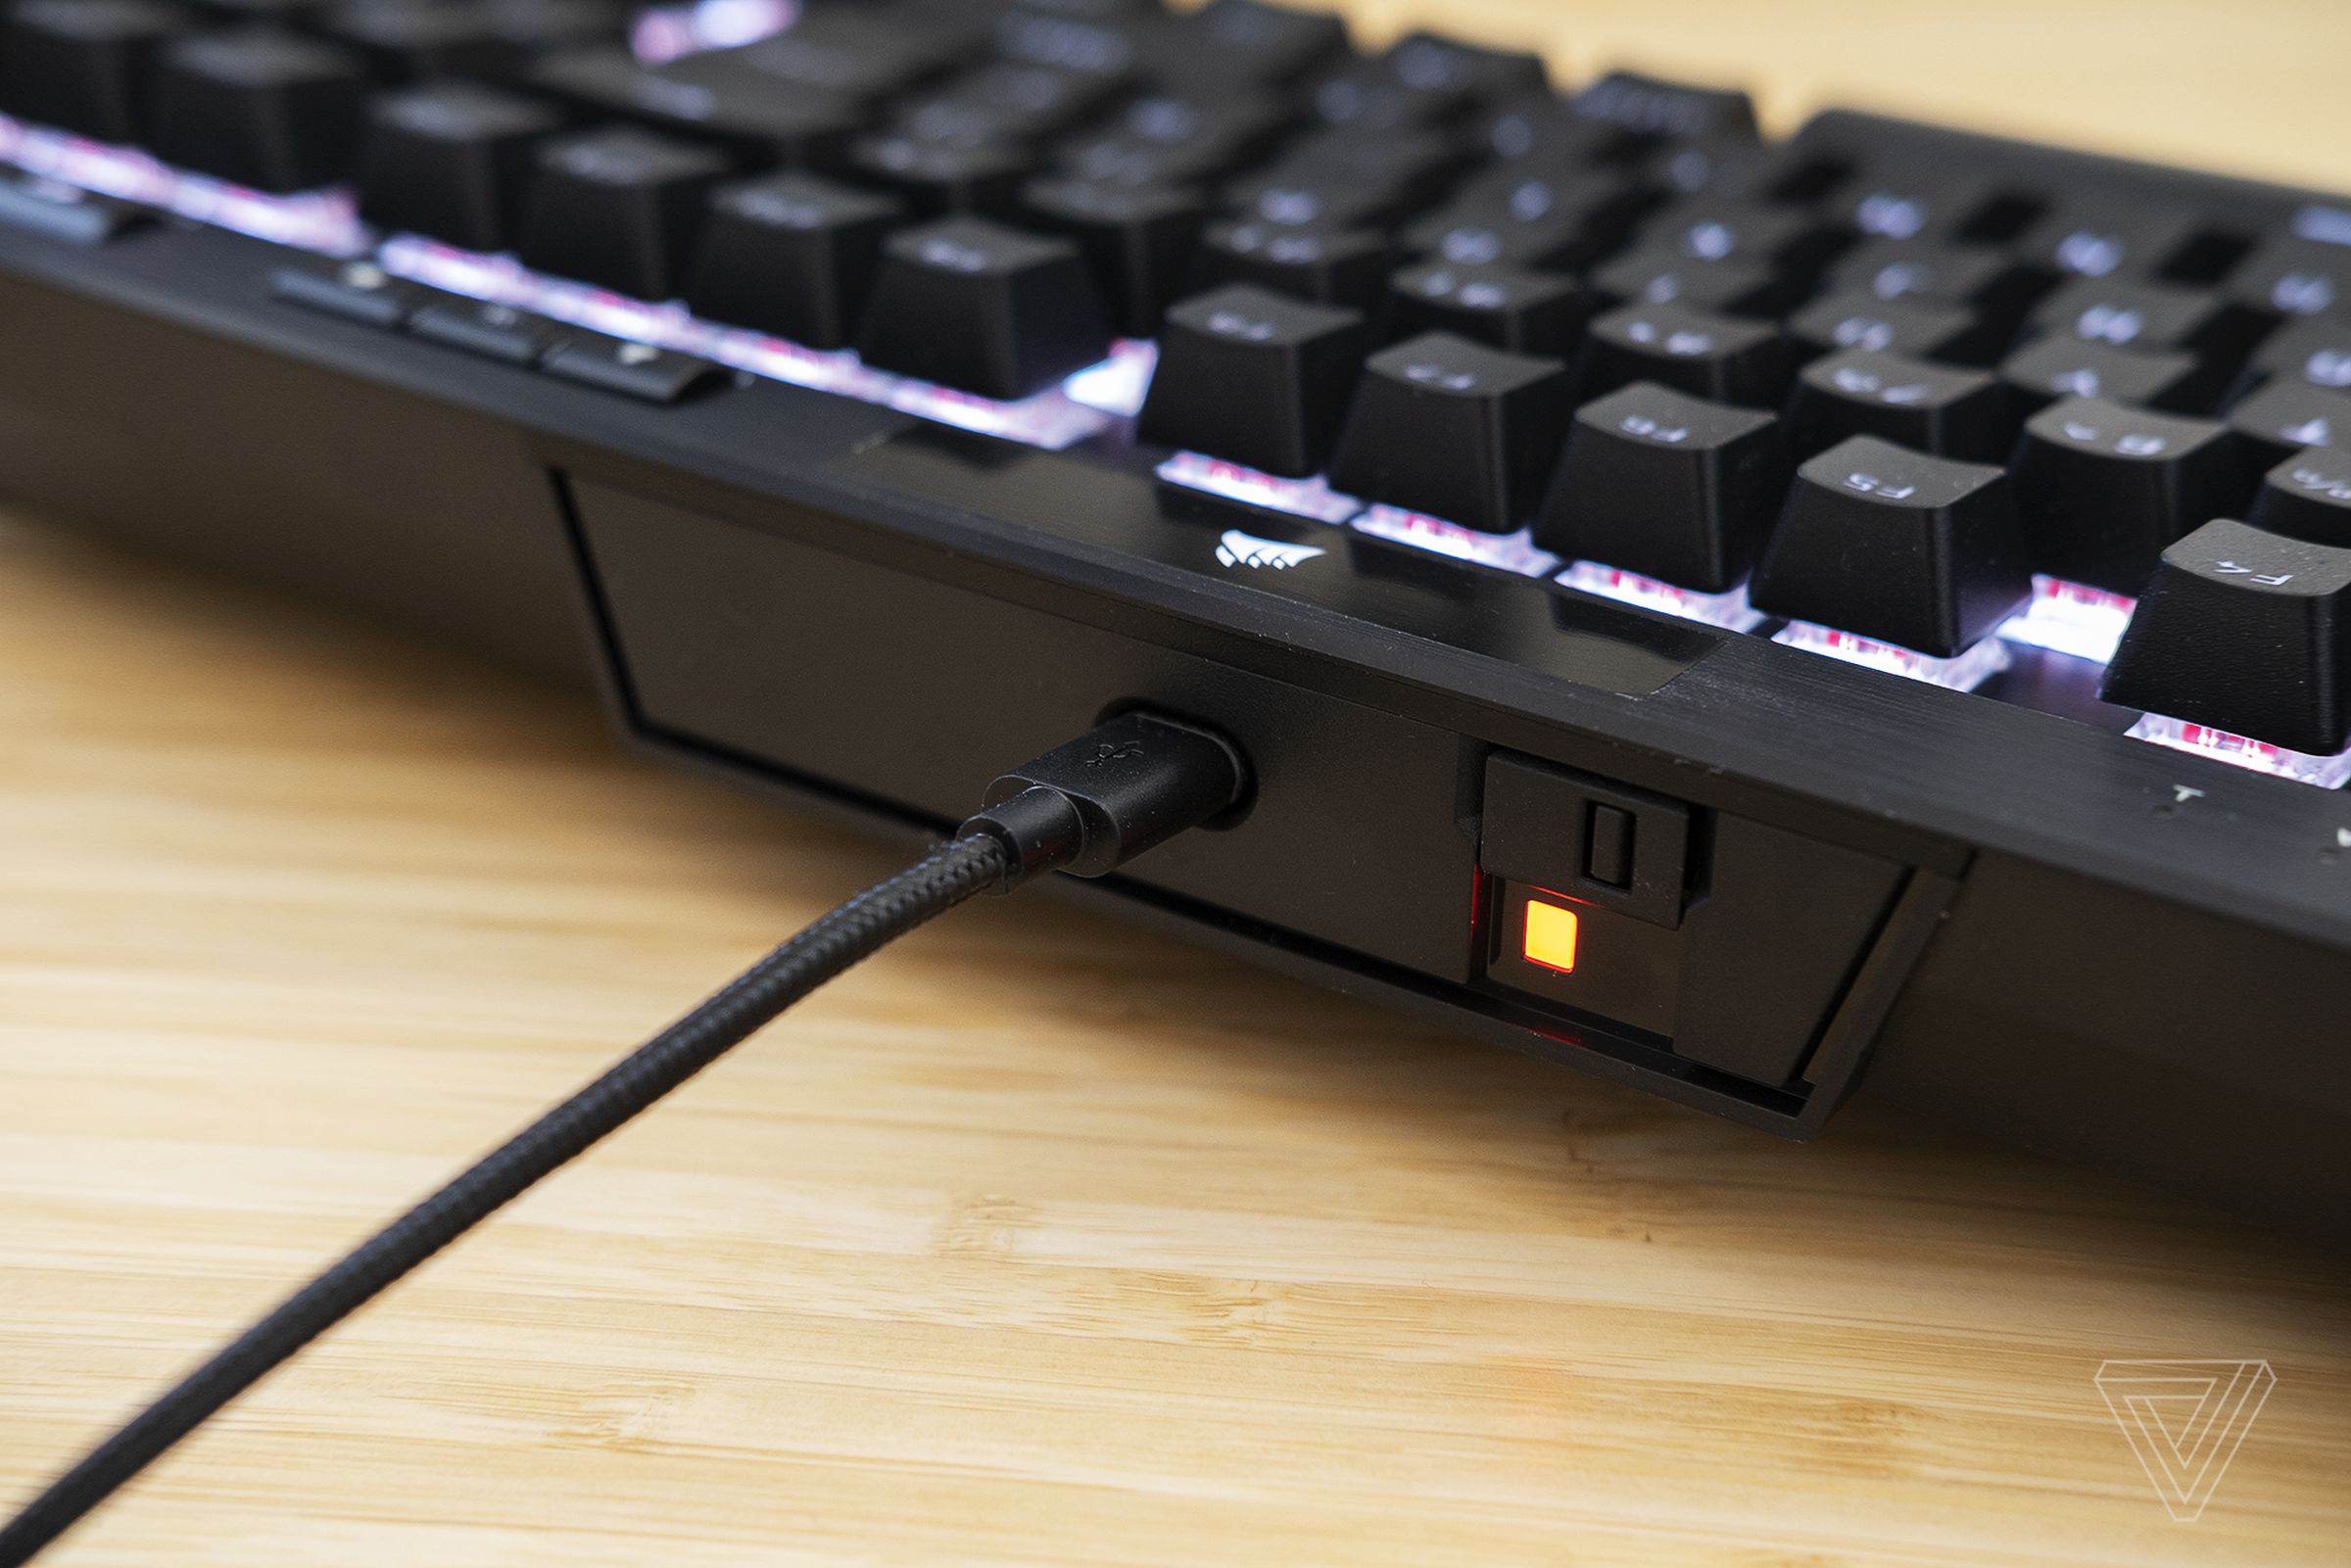 The K70’s “tournament switch” and detachable USB-C cable.